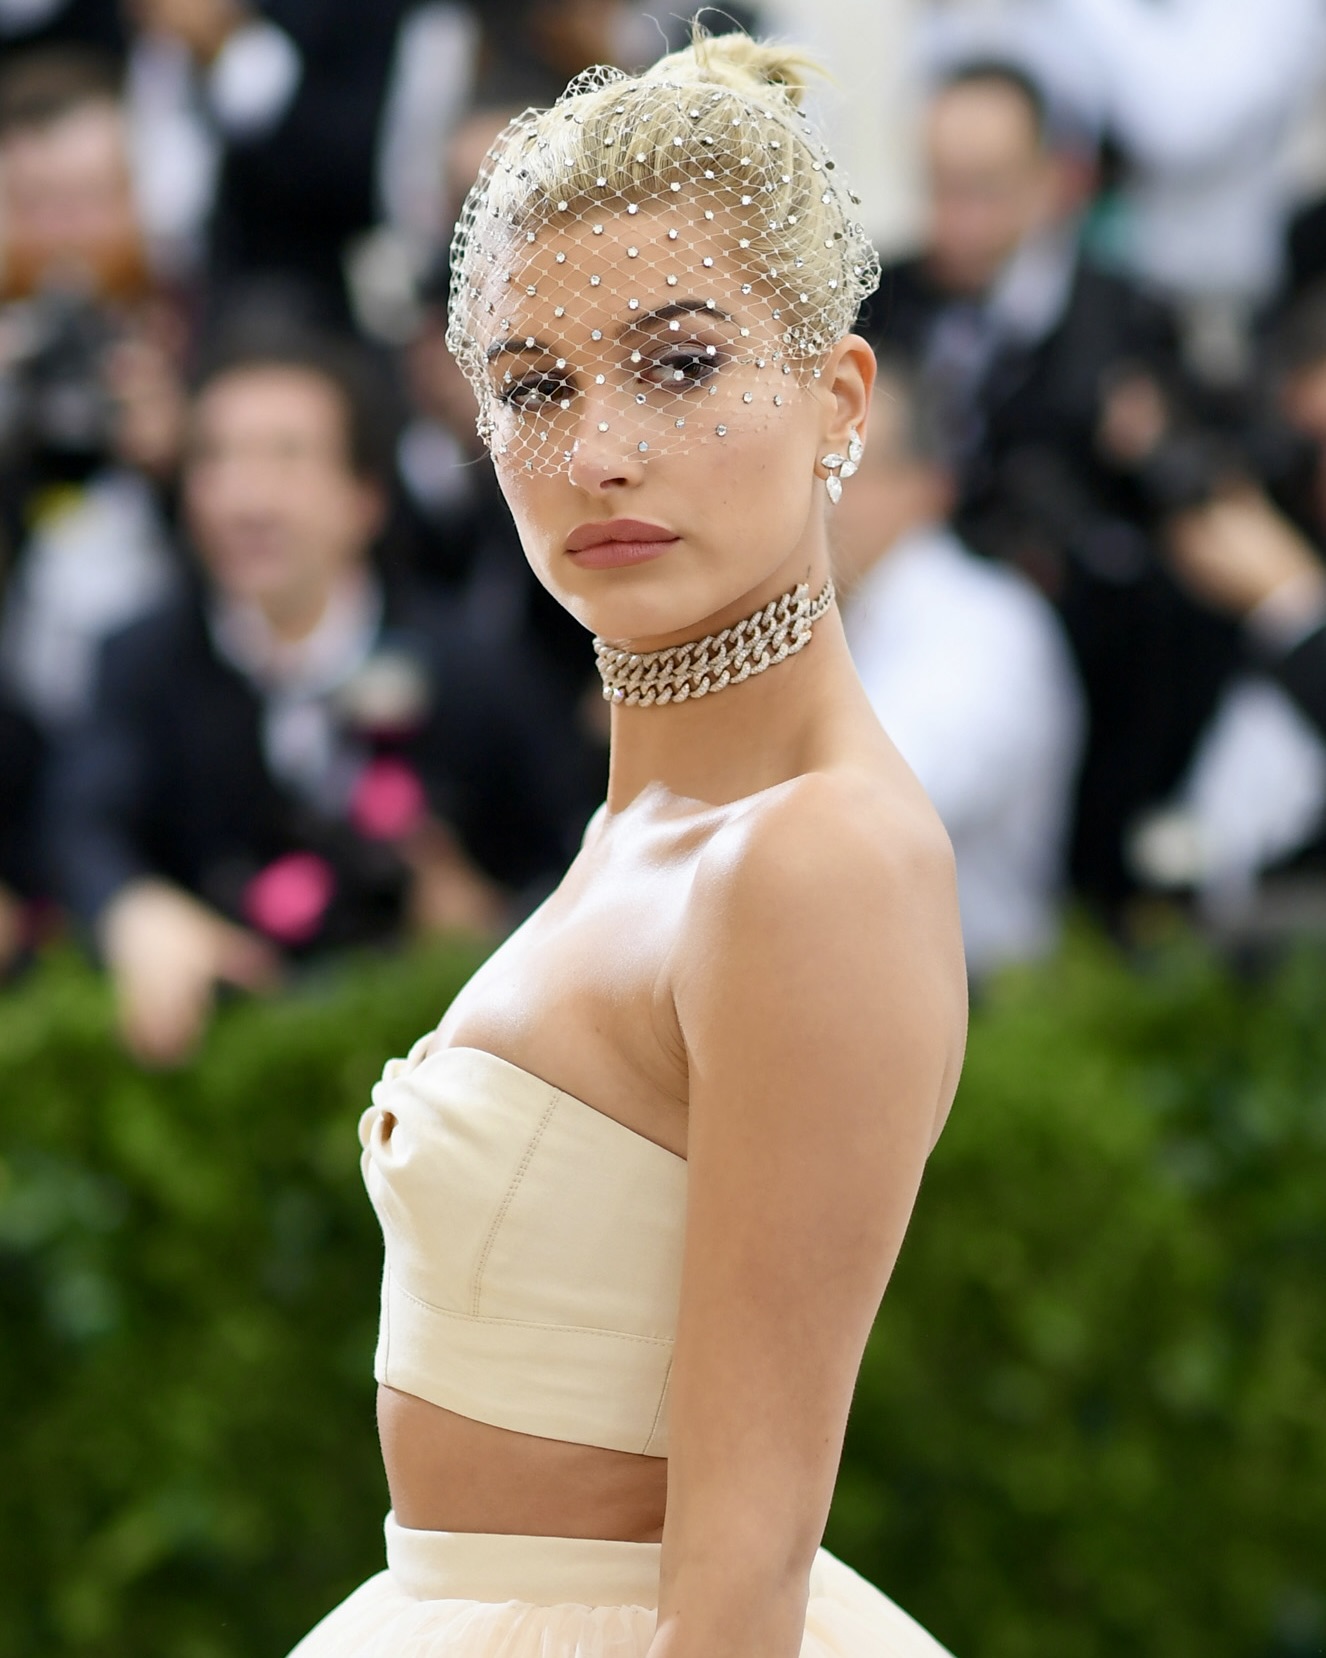 Hailey Bieber shined in natural diamond jewelry at the 2017 Met Gala.